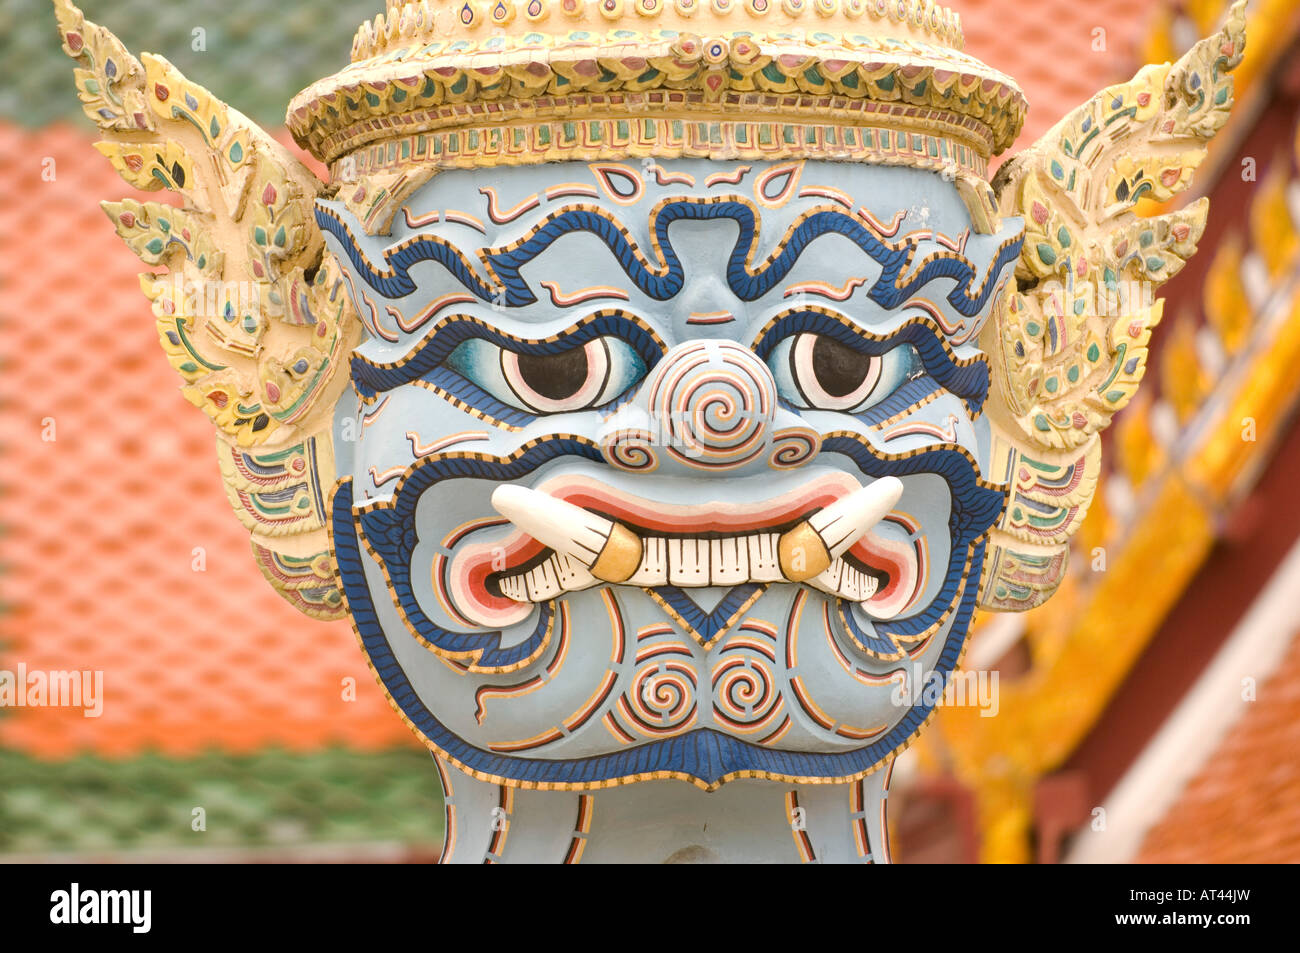 Head of a mythical beast statue on the grounds of the Grand Palace Bangkok Thailand Stock Photo